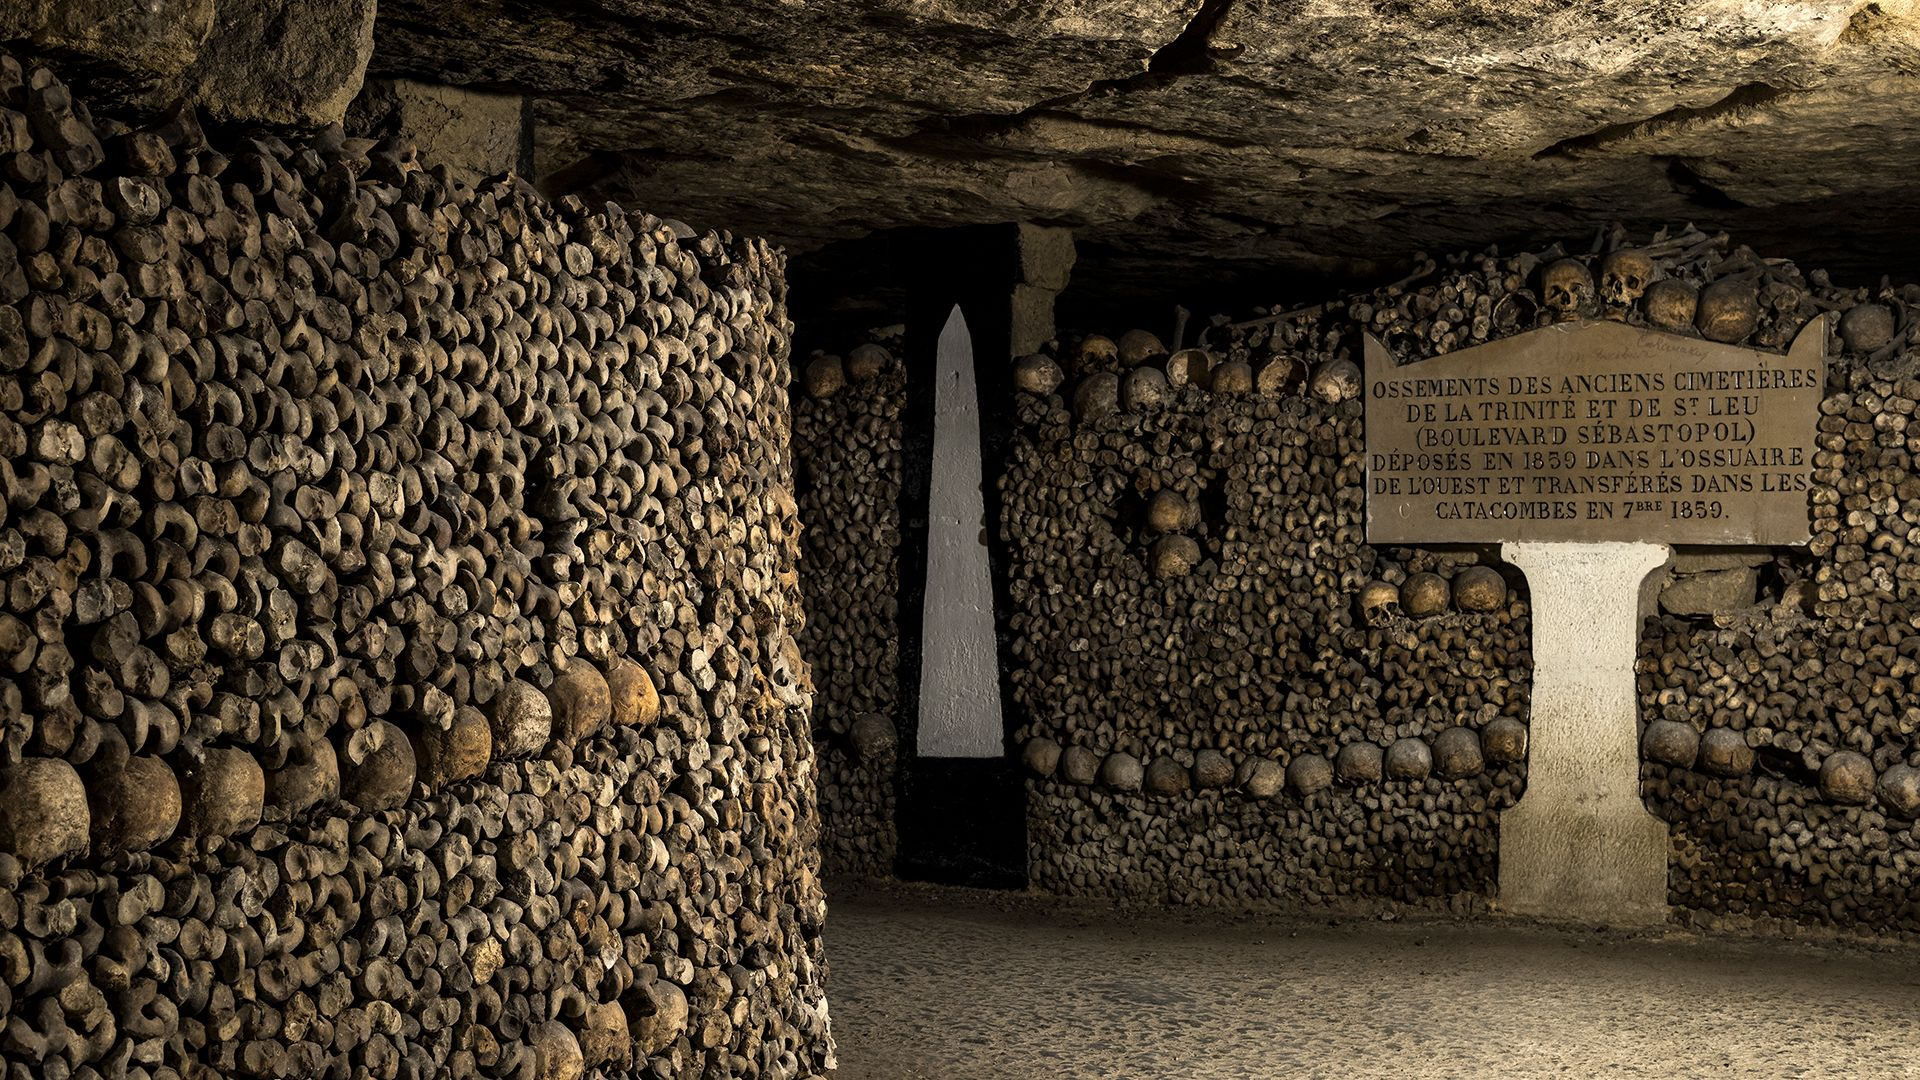 Catacombs of Paris – Fascinating and Scary at the Same Time